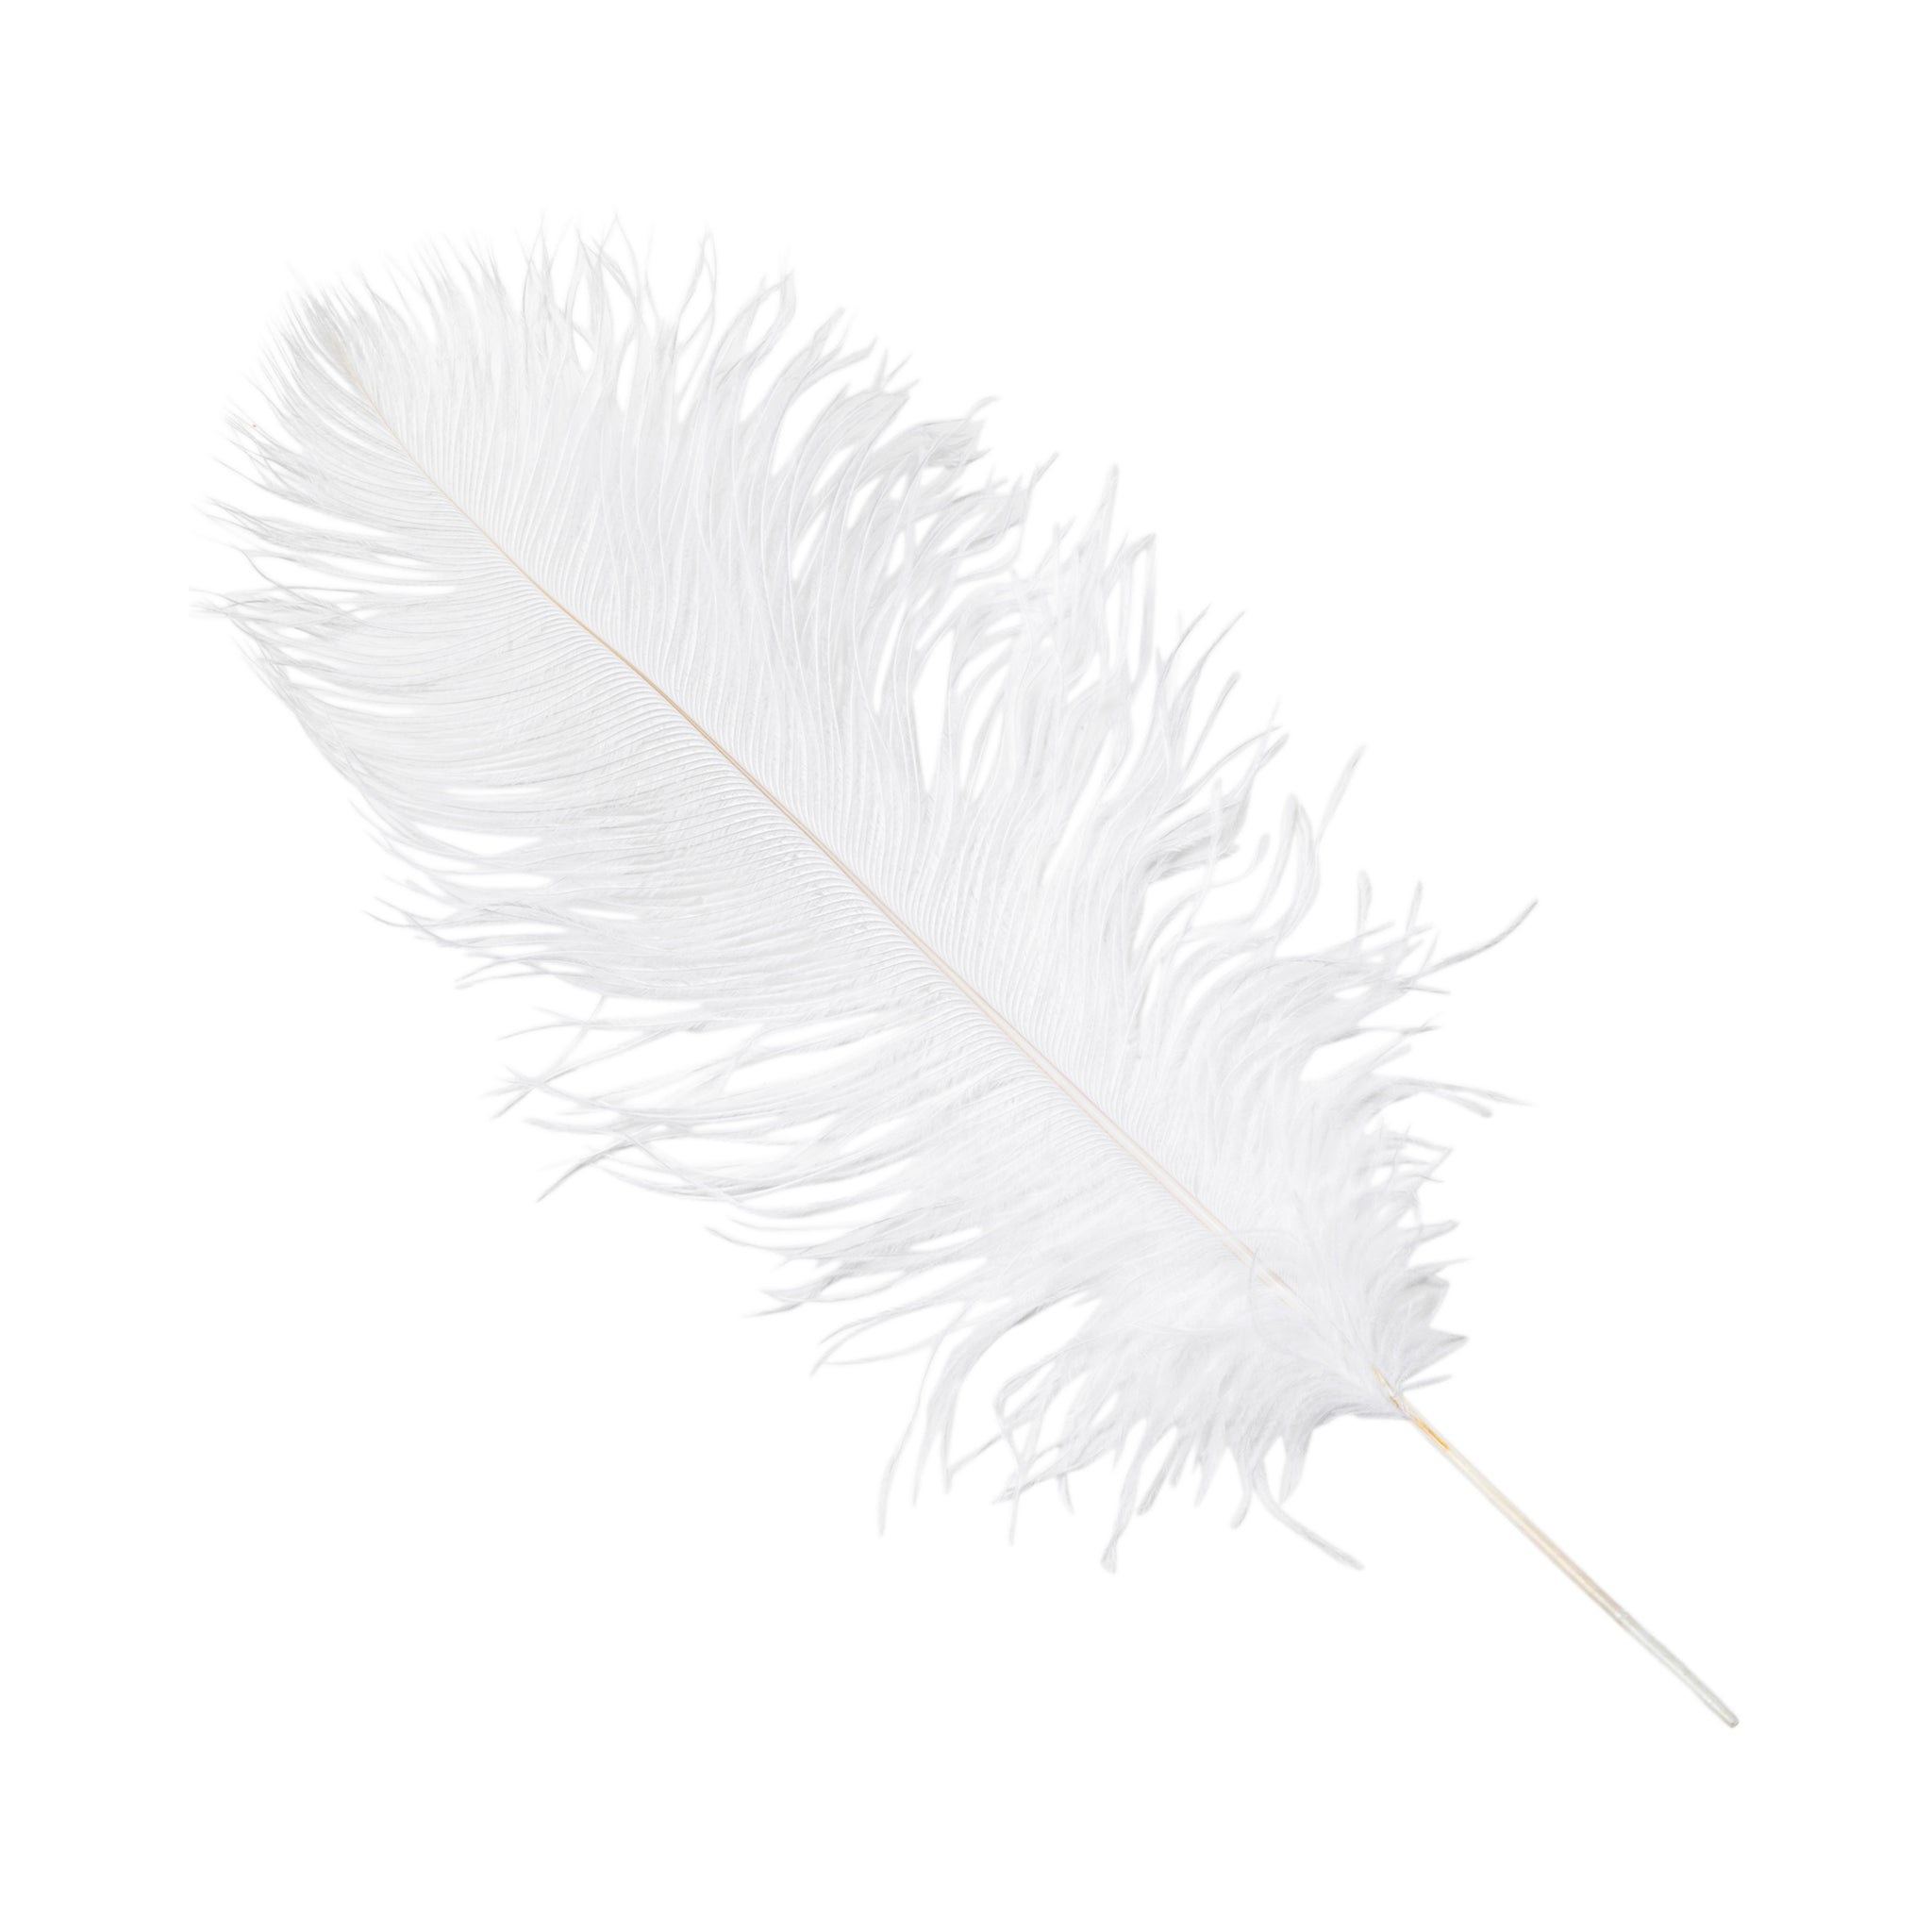 Large Ostrich Feathers Bulk-Making Kit 10Pcs 28 Long Feathers for